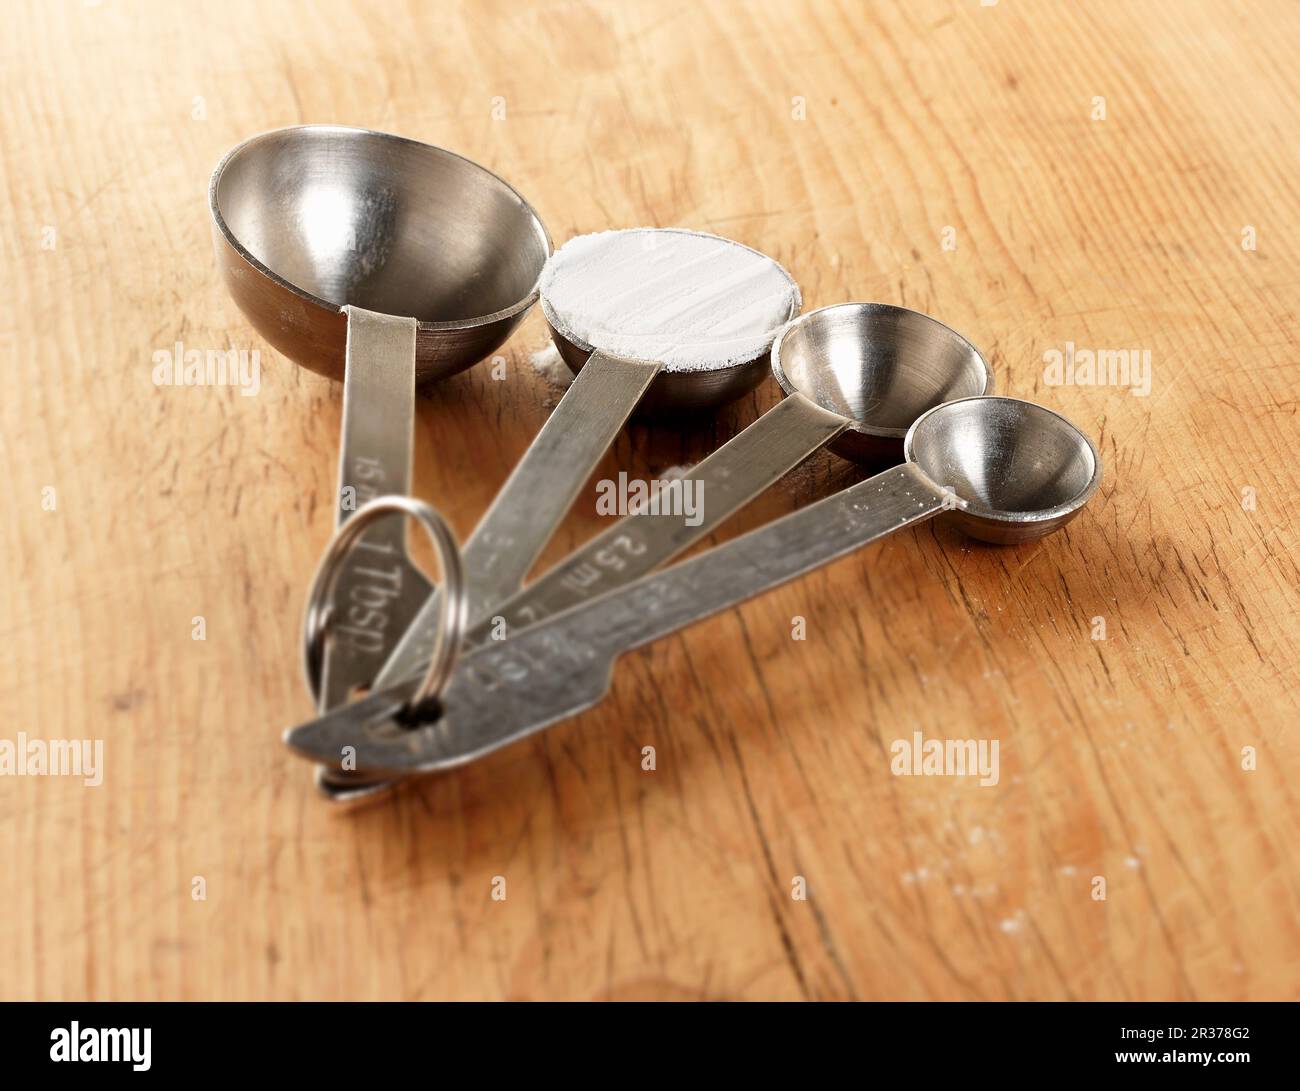 https://c8.alamy.com/comp/2R378G2/four-measuring-spoons-one-showing-a-level-teaspoon-of-baking-powder-shot-on-a-wooden-surface-2R378G2.jpg